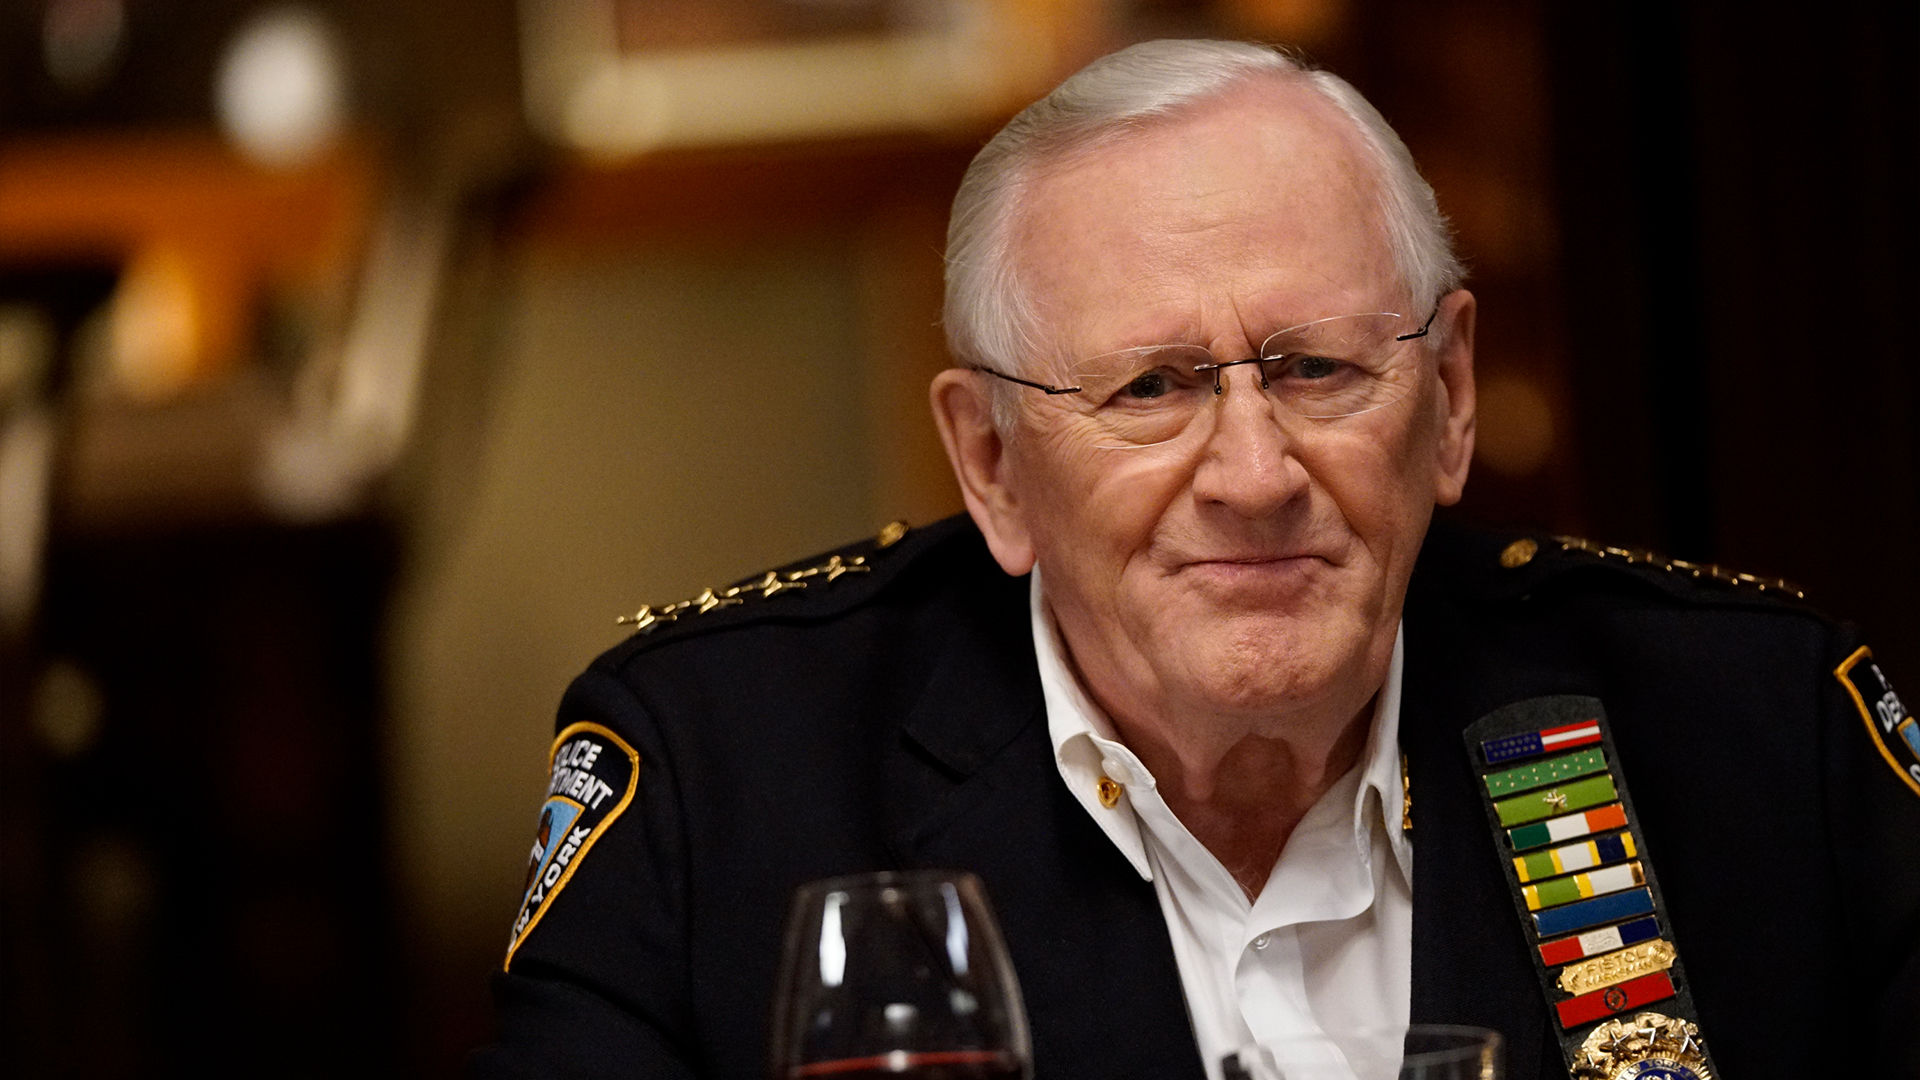 Blue Bloods Season 8 Episode 18 - Friendship, Love and Loyalty